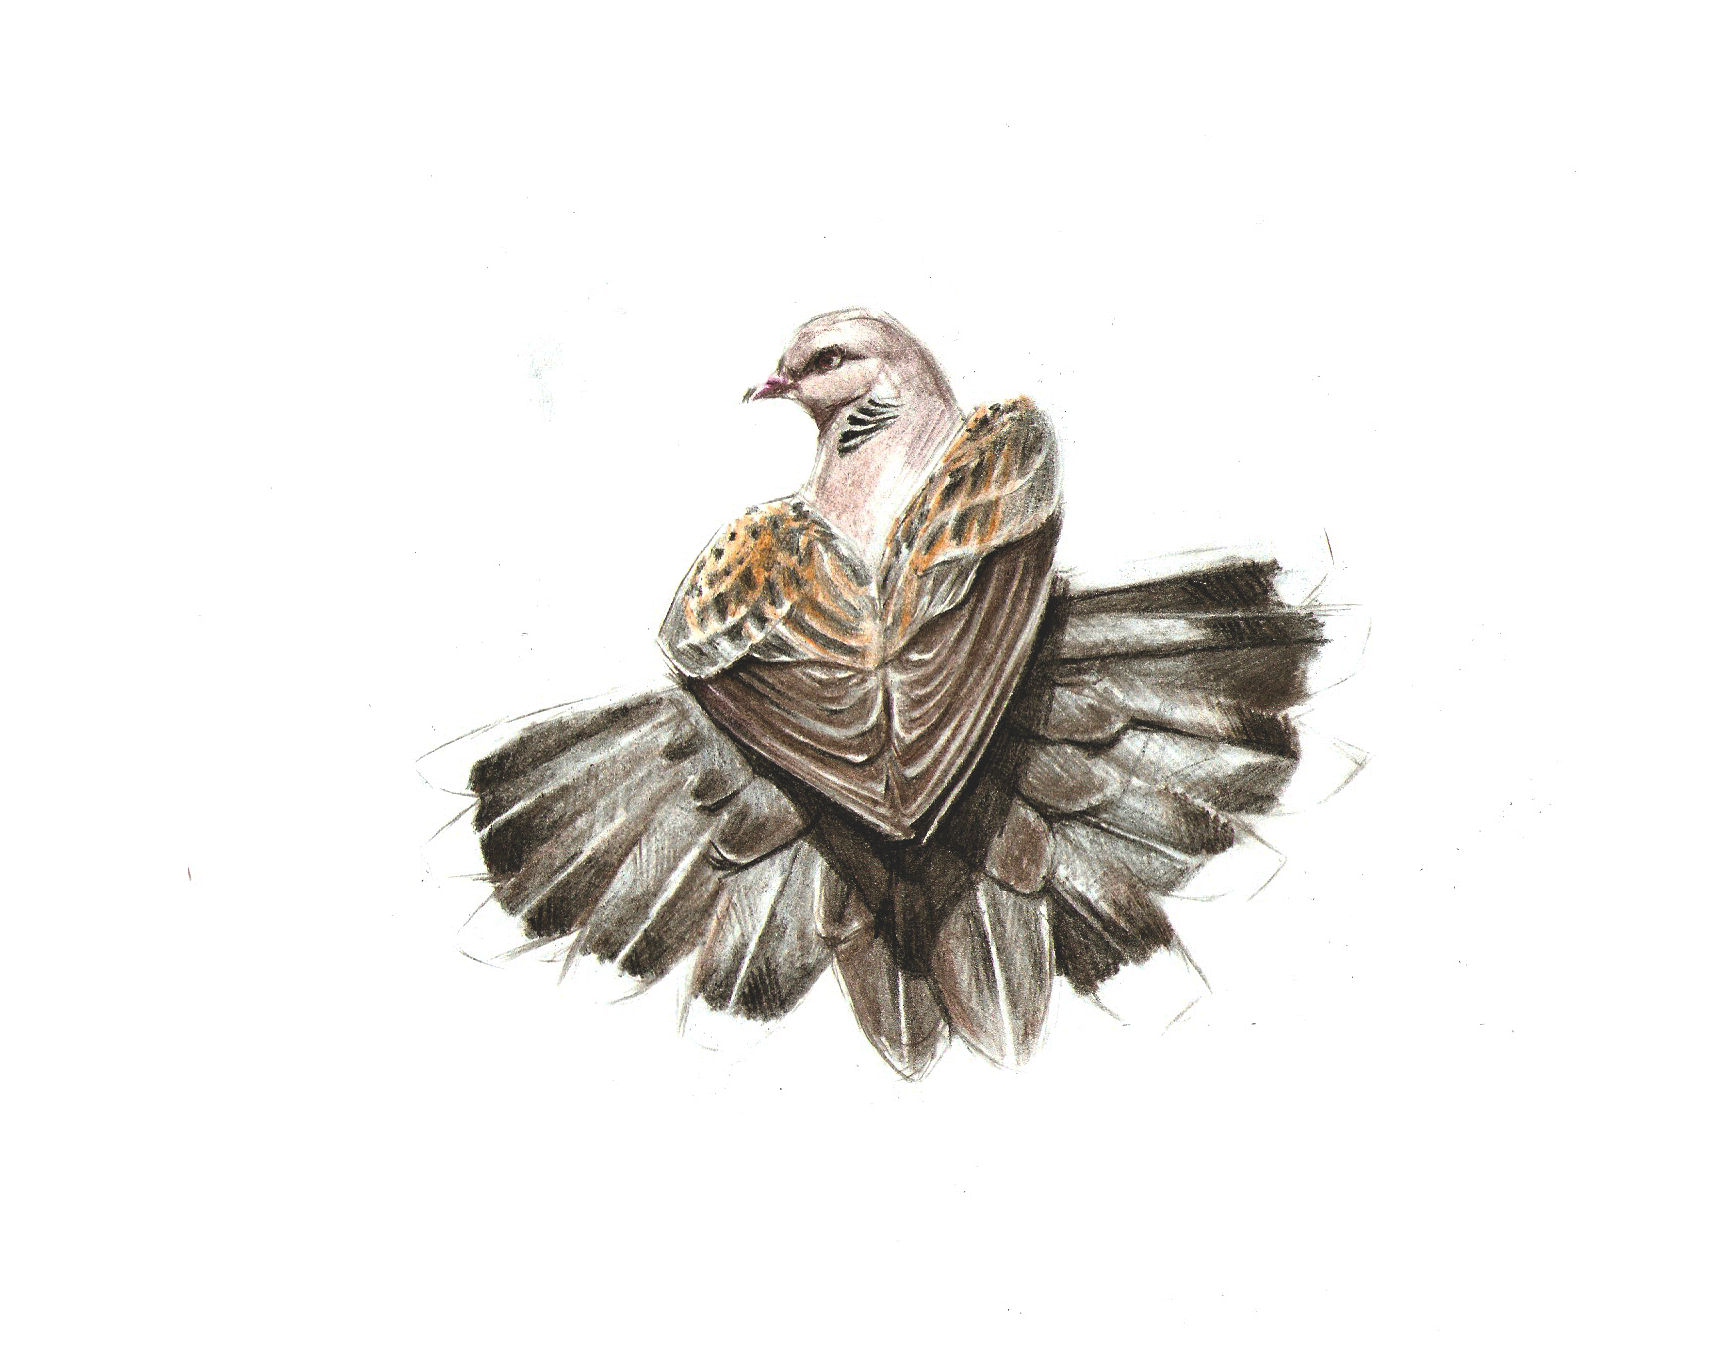 Turtle Dove Drawing at GetDrawings Free download